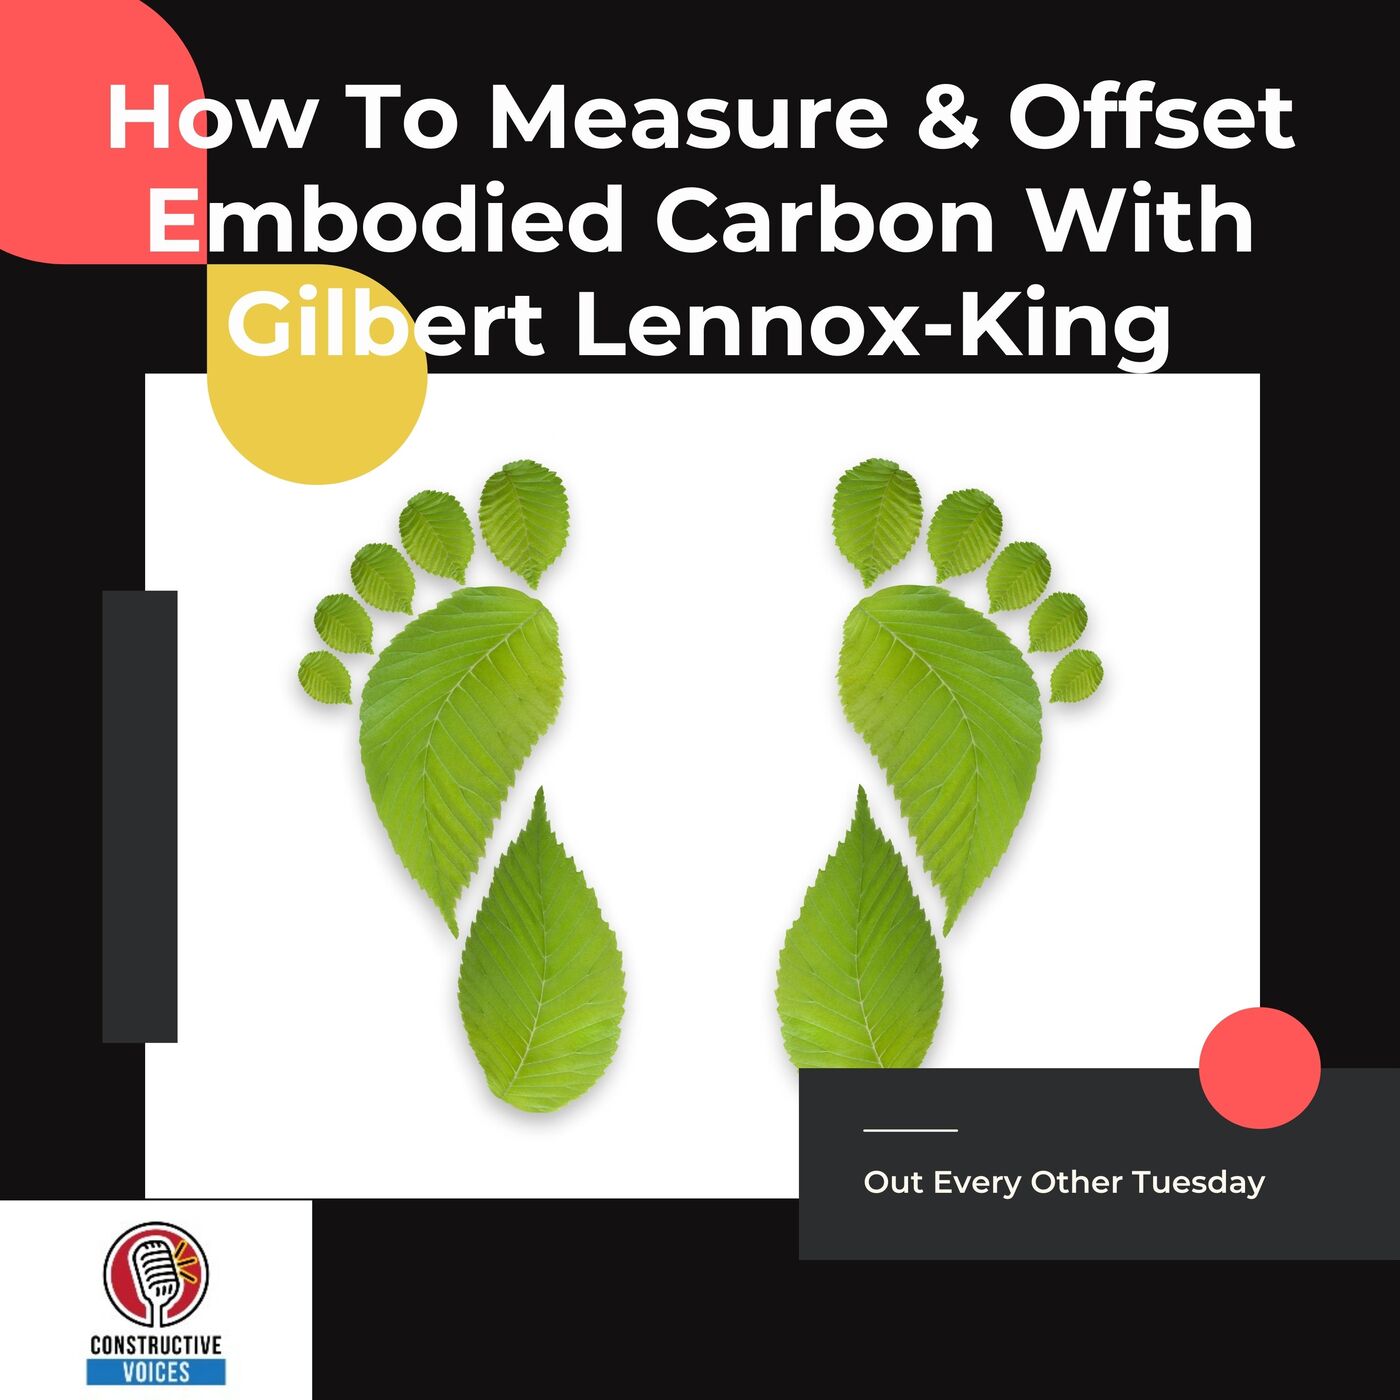 How To Measure & Offset Embodied Carbon With Gilbert Lennox-King